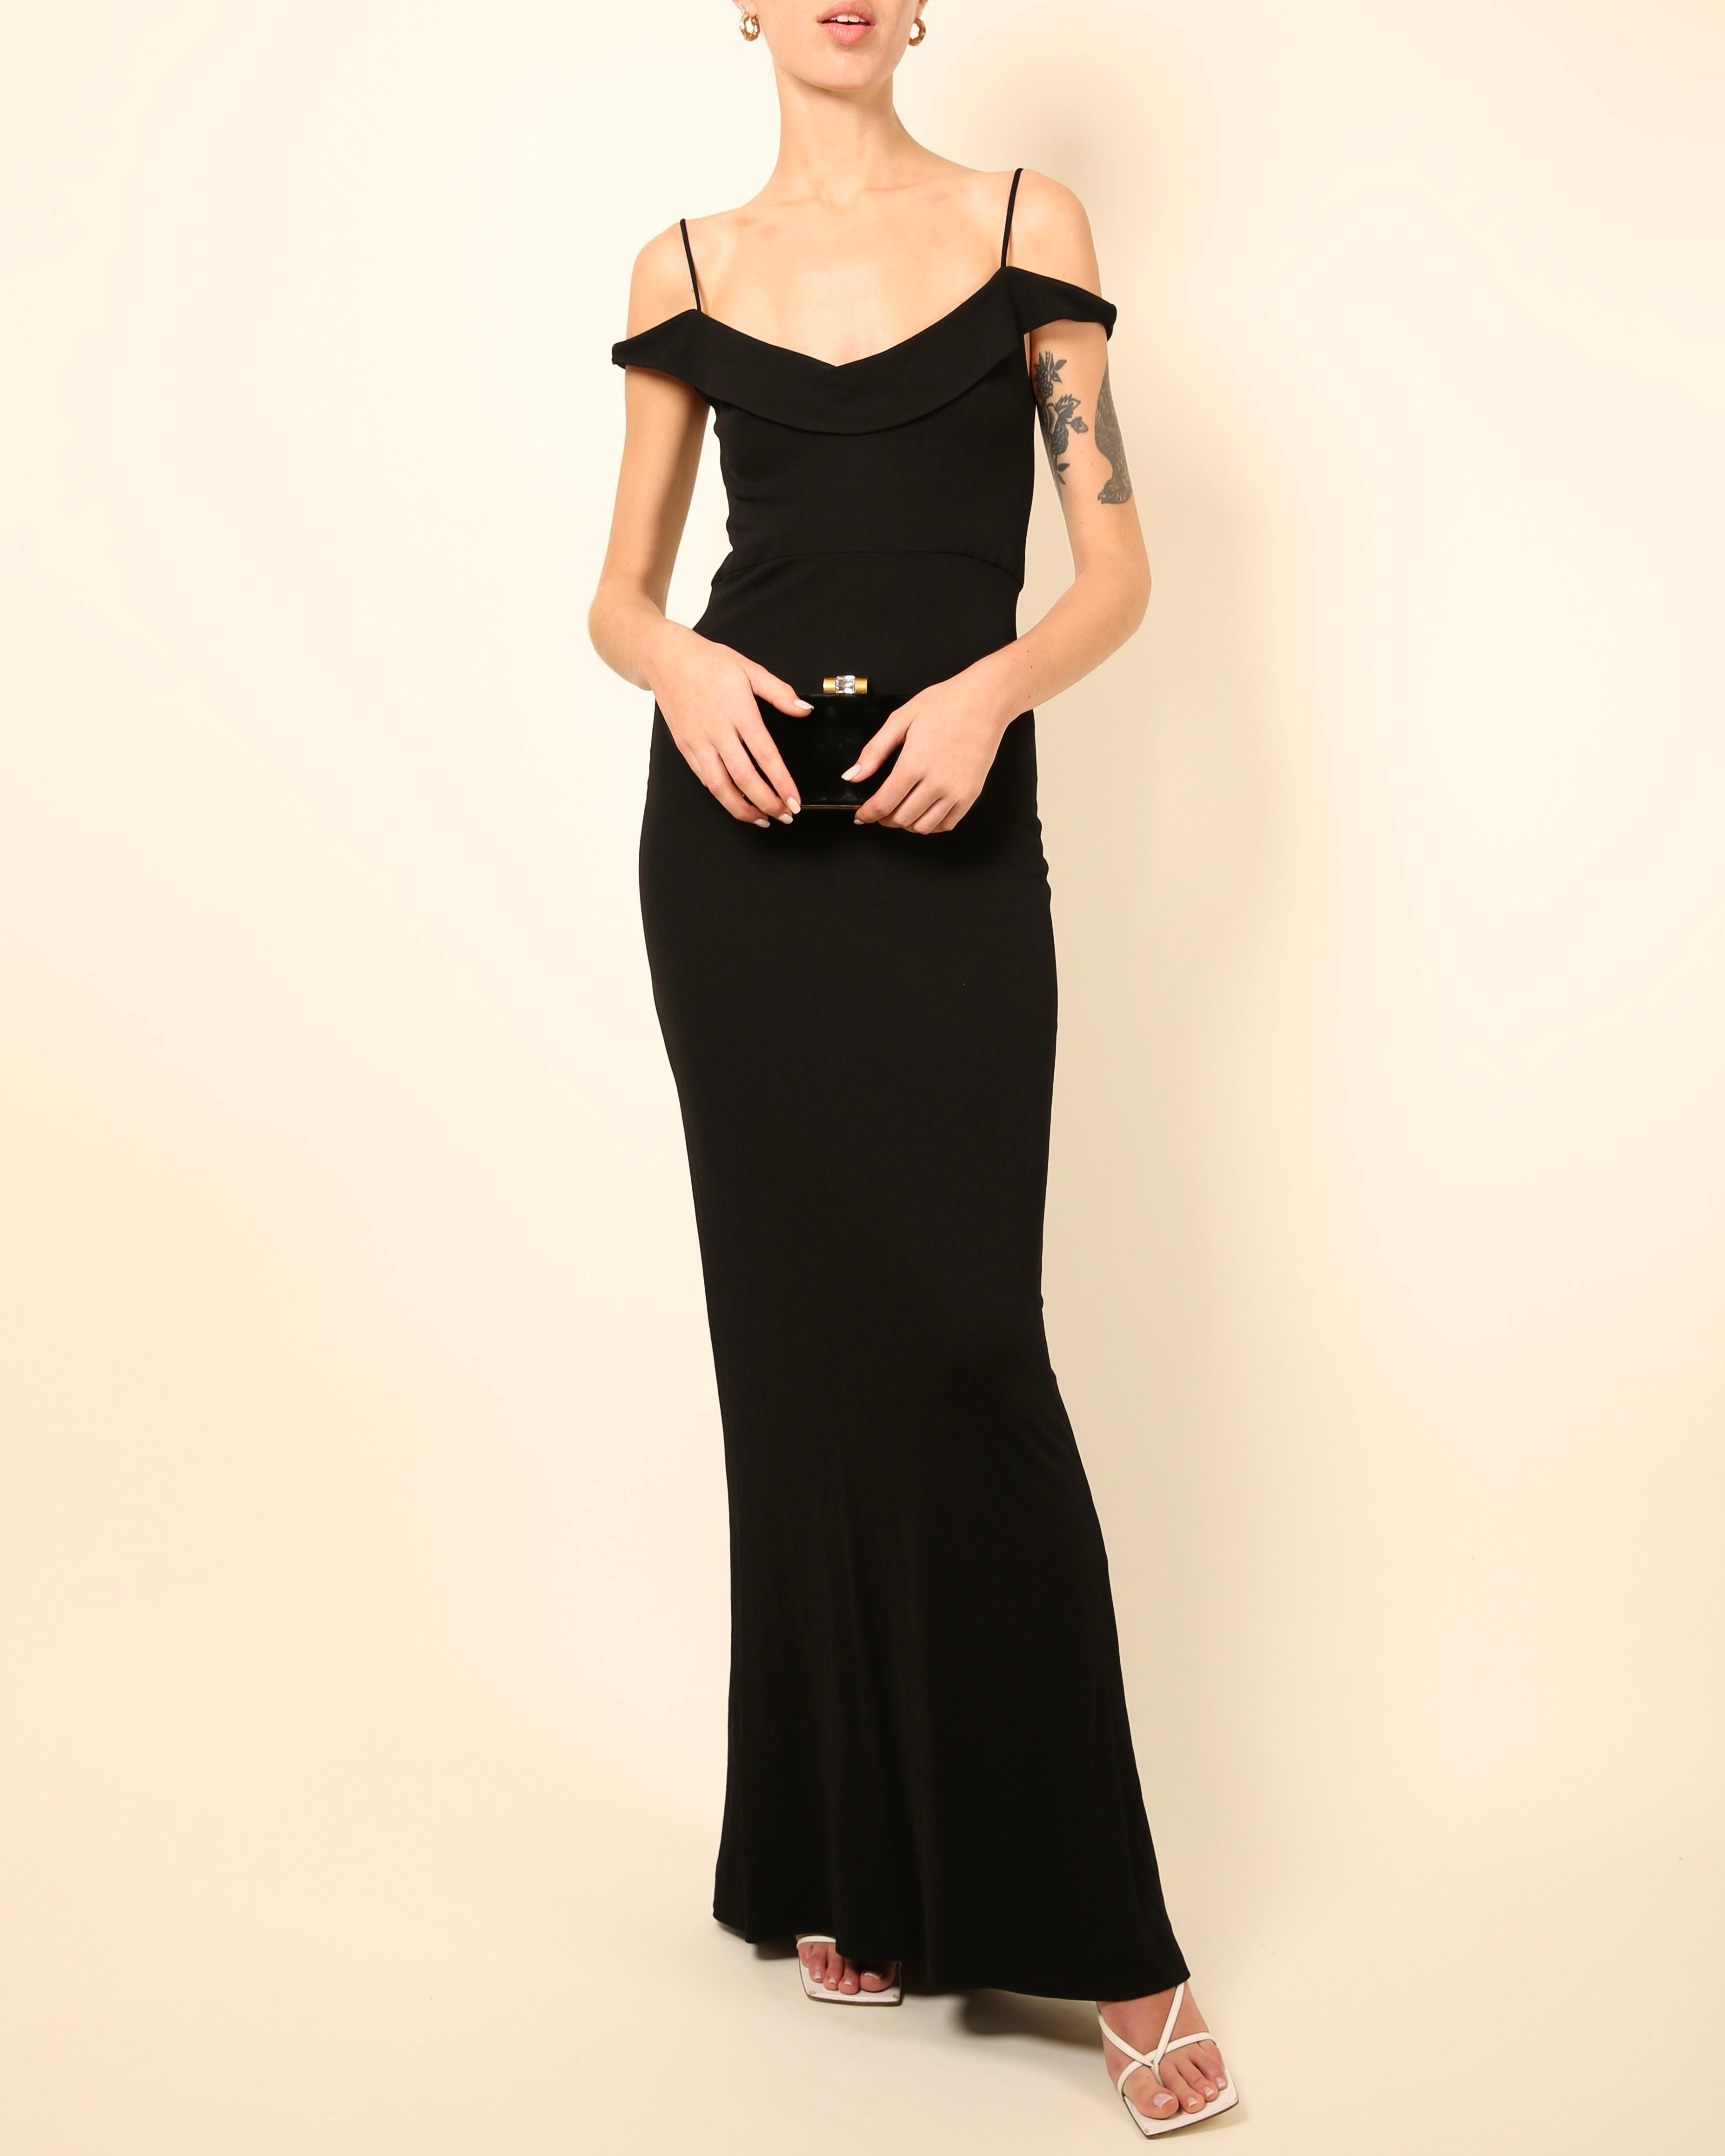 LOVE LALI Vintage

Vera Wang black off the shoulder floor length dress
Body skimming cut
Concealed back zip

Size:
No size label - estimated to fit an XS but please refer to the measurements below

Composition:
No composition label however the